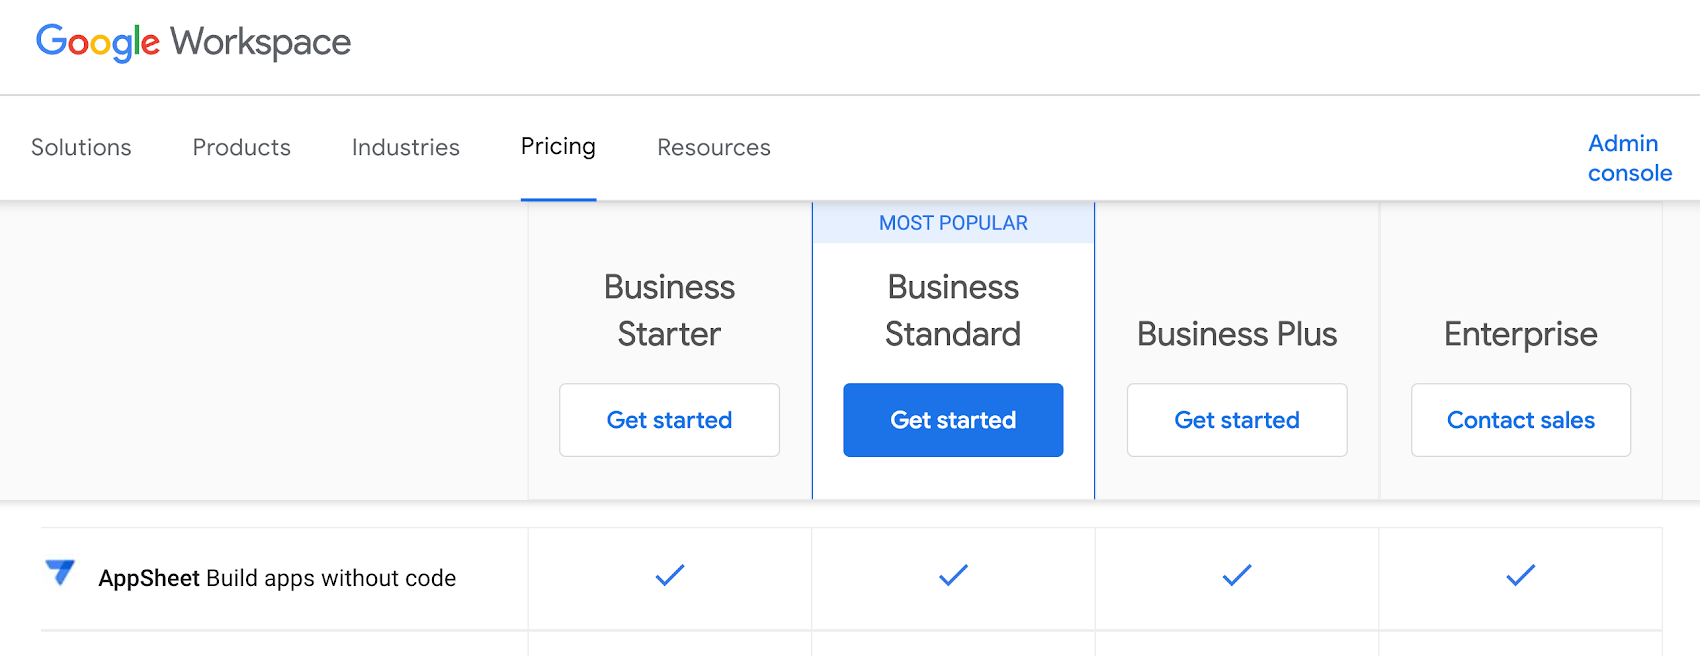 https://storage.googleapis.com/gweb-cloudblog-publish/images/Copy_of_02_Workspace_pricing_page_with_App.max-1700x1700.png